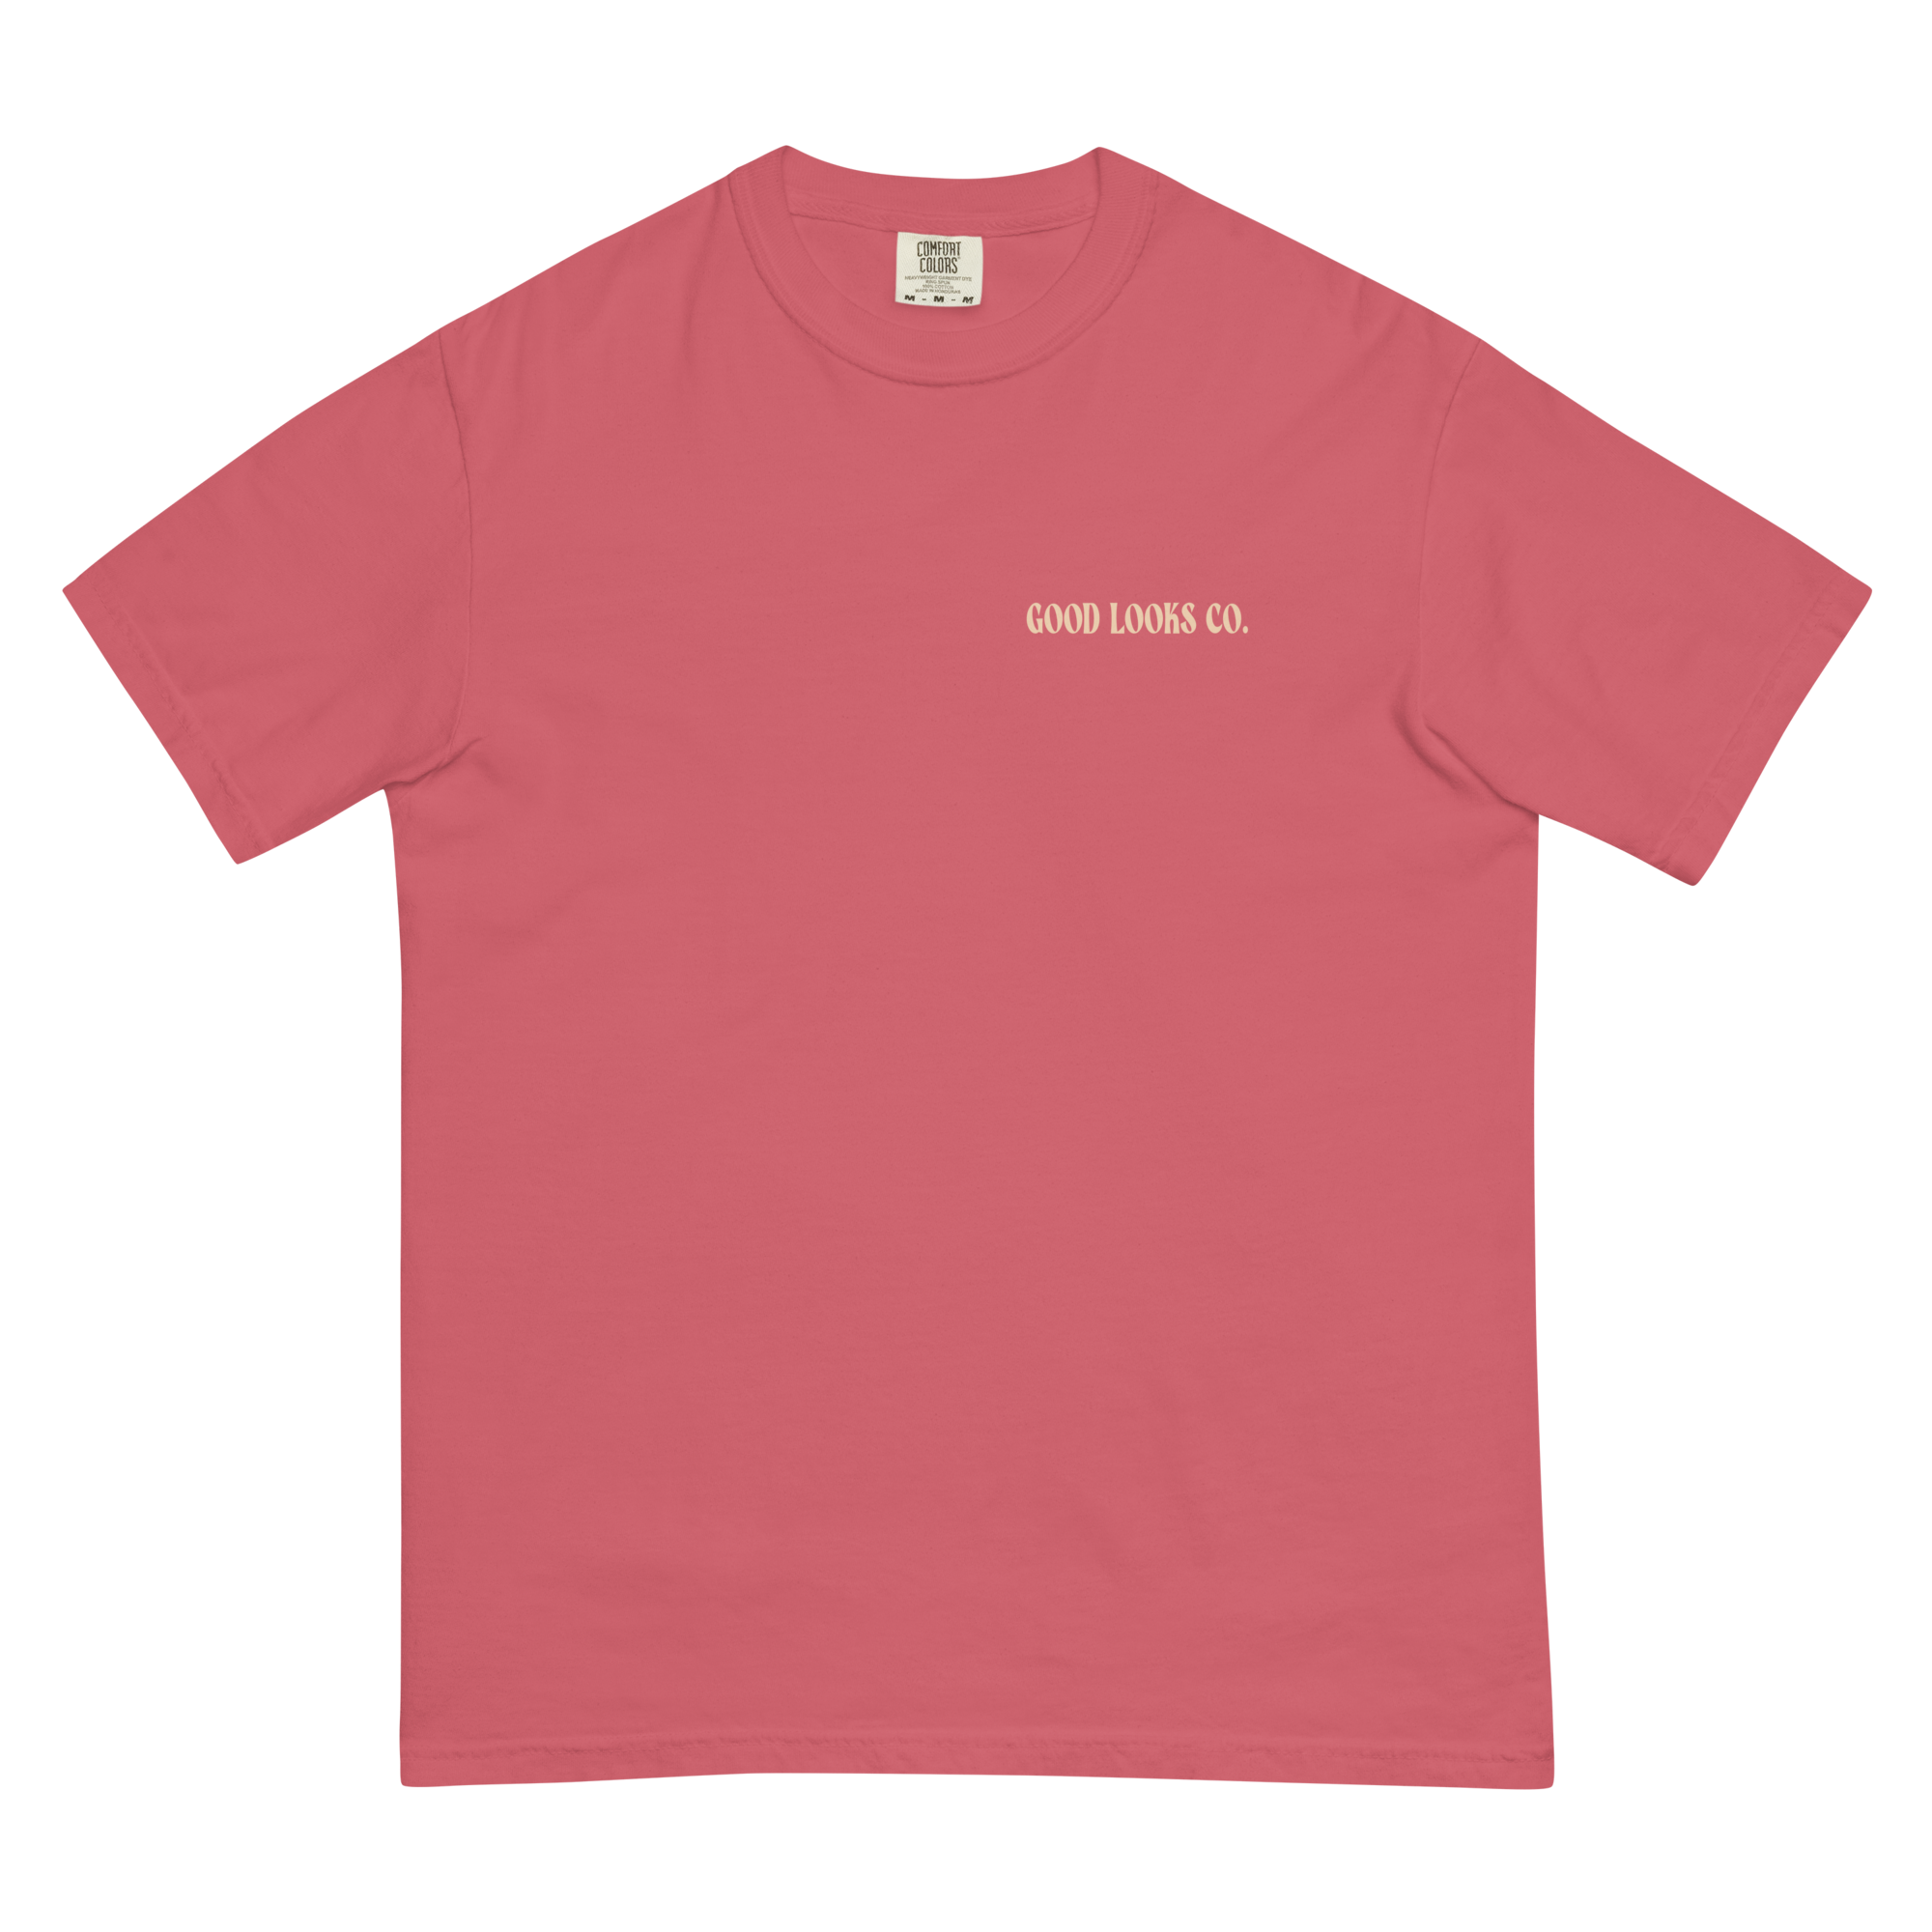 Positively Motivated Heavyweight Tee